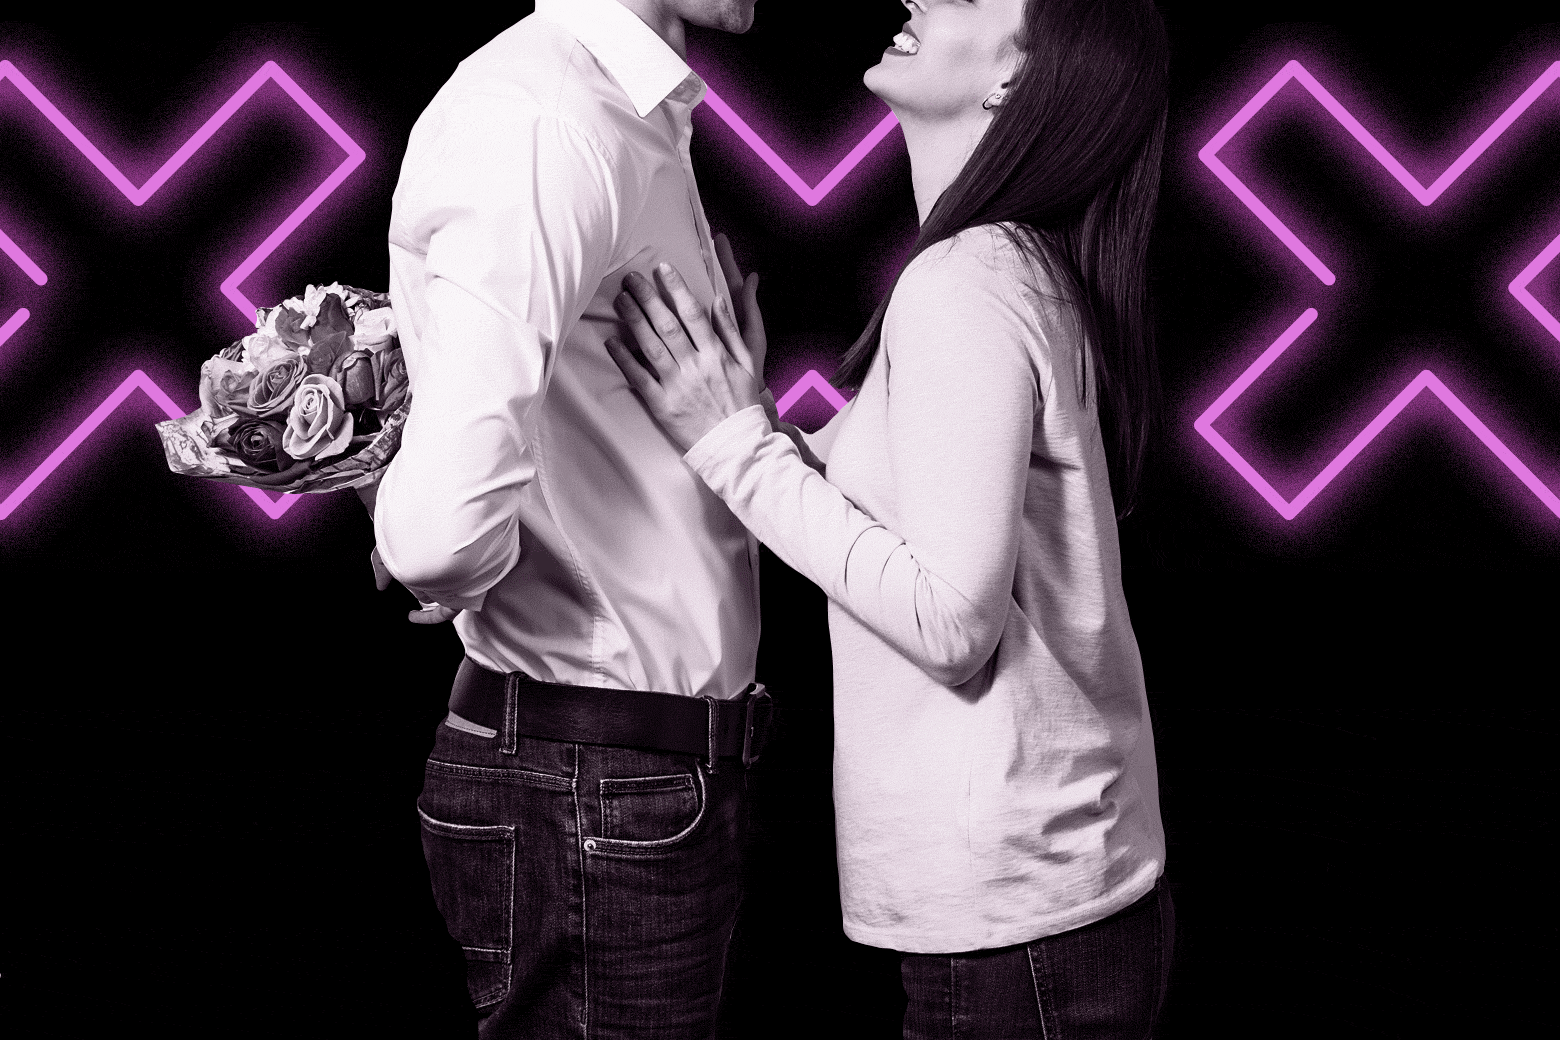 A man holds a bouquet of flowers behind his back while a woman looks up at him, resting her hands on his chest. XXX neon lights are in the background.